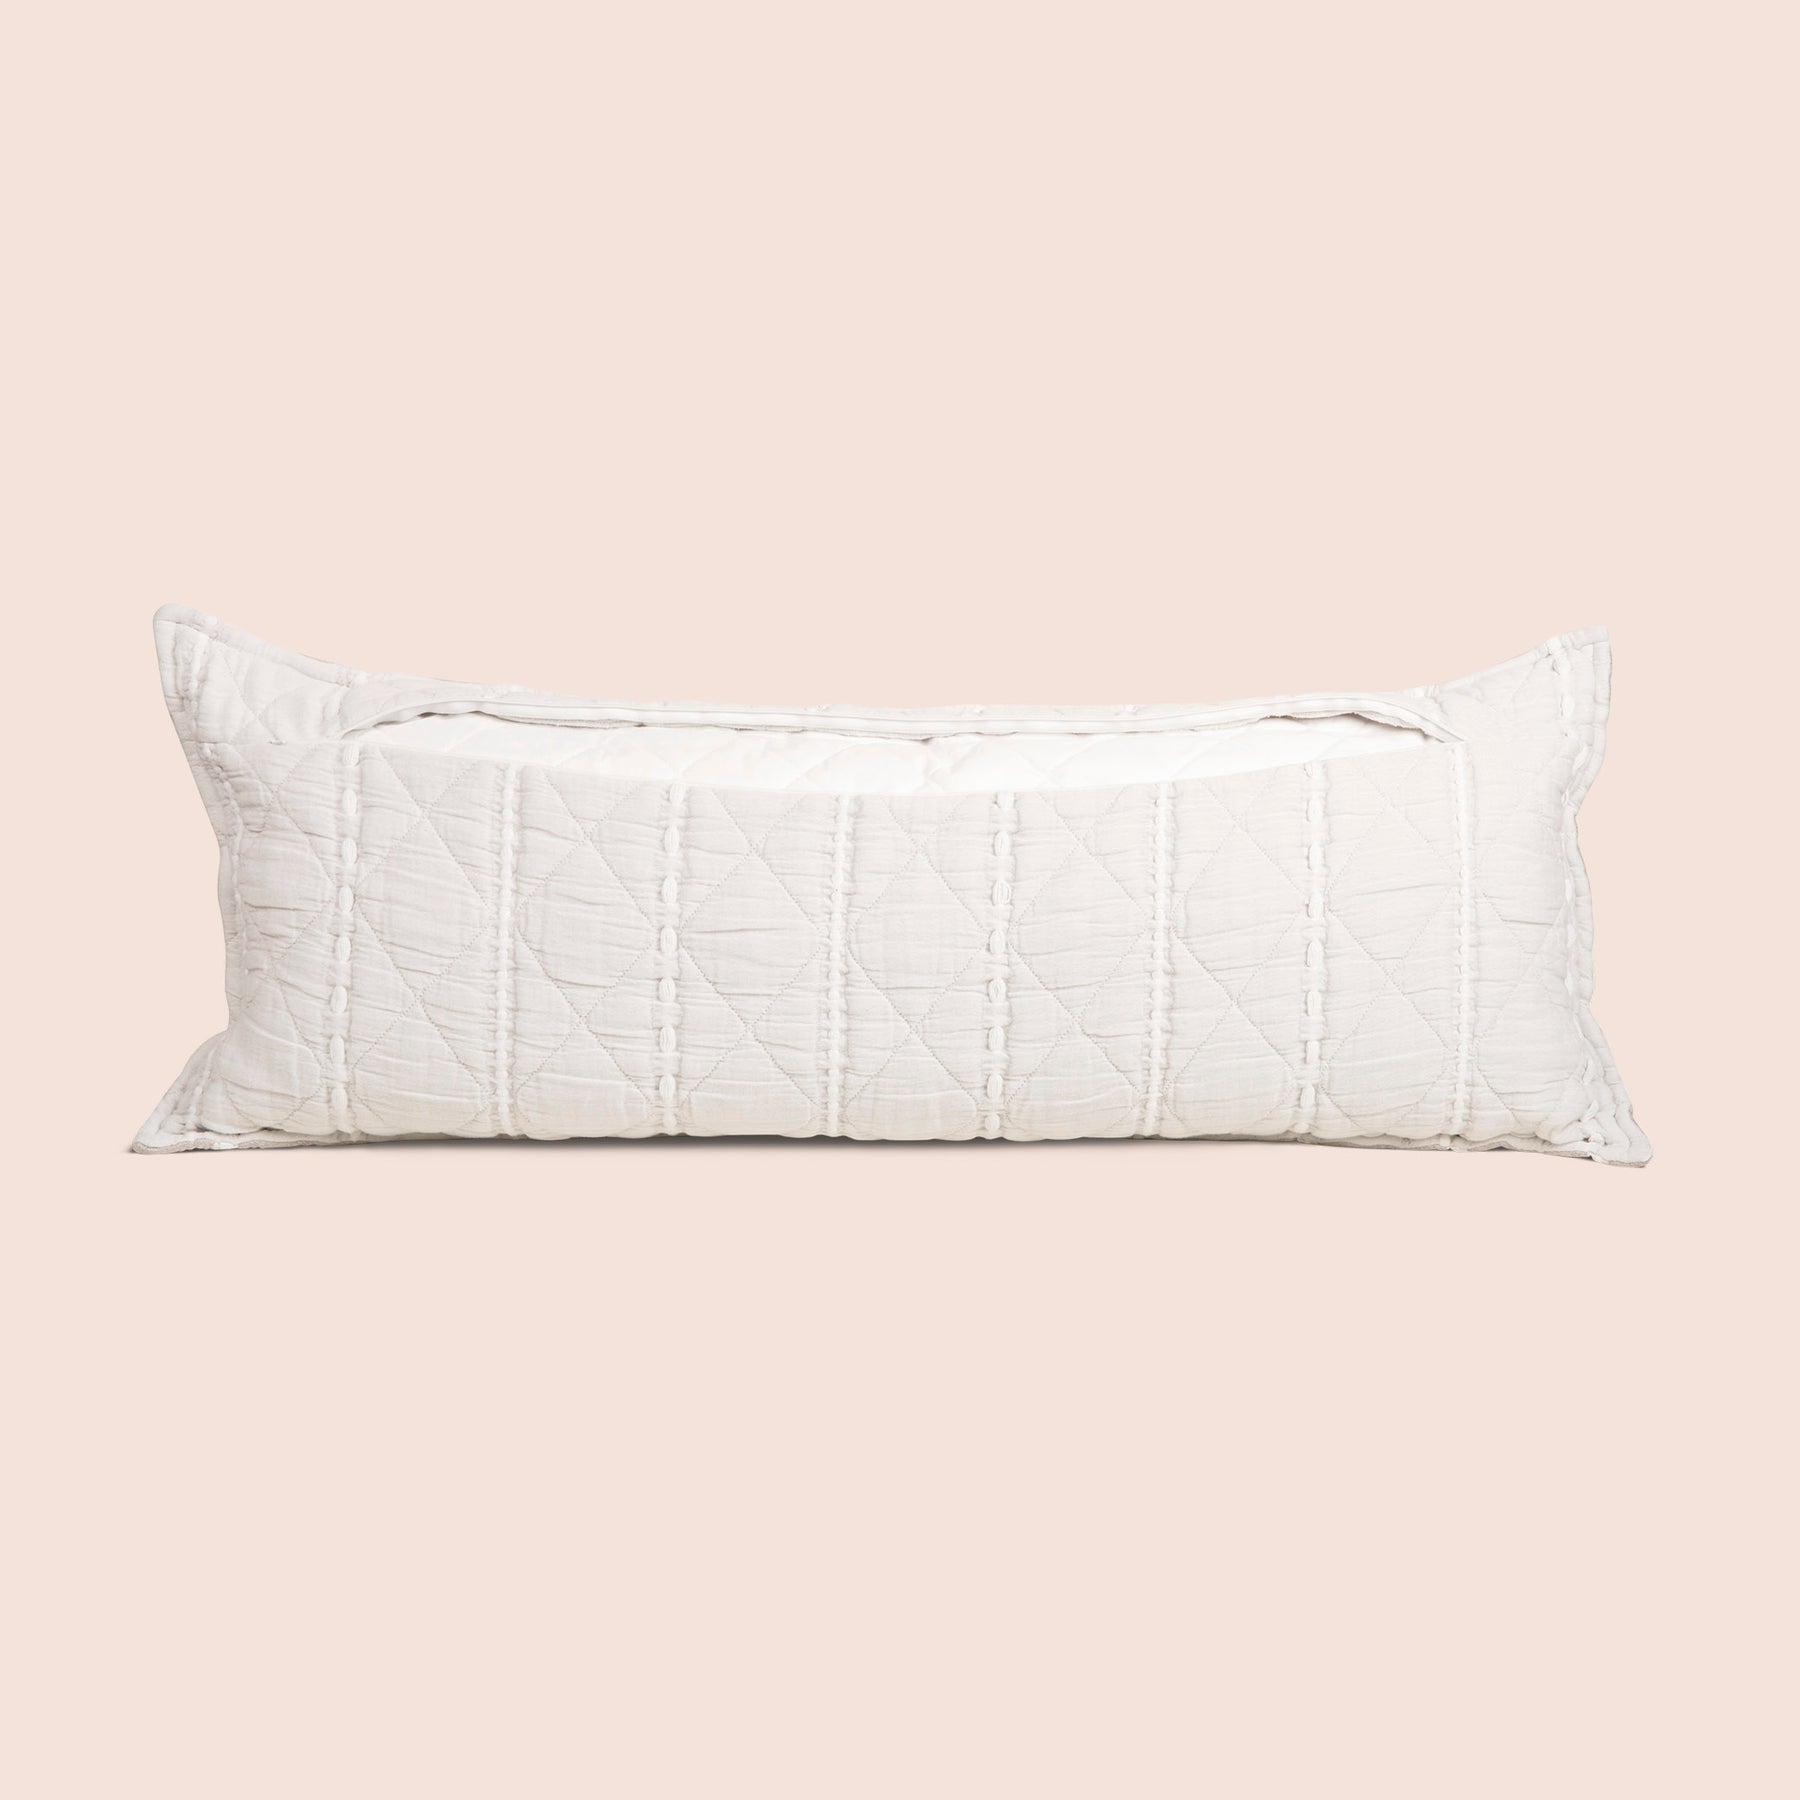 Image of the back of the all-white reversible side of the Heritage Lumbar Pillow Cover on a lumbar pillow with the back zipper open on a light pink background